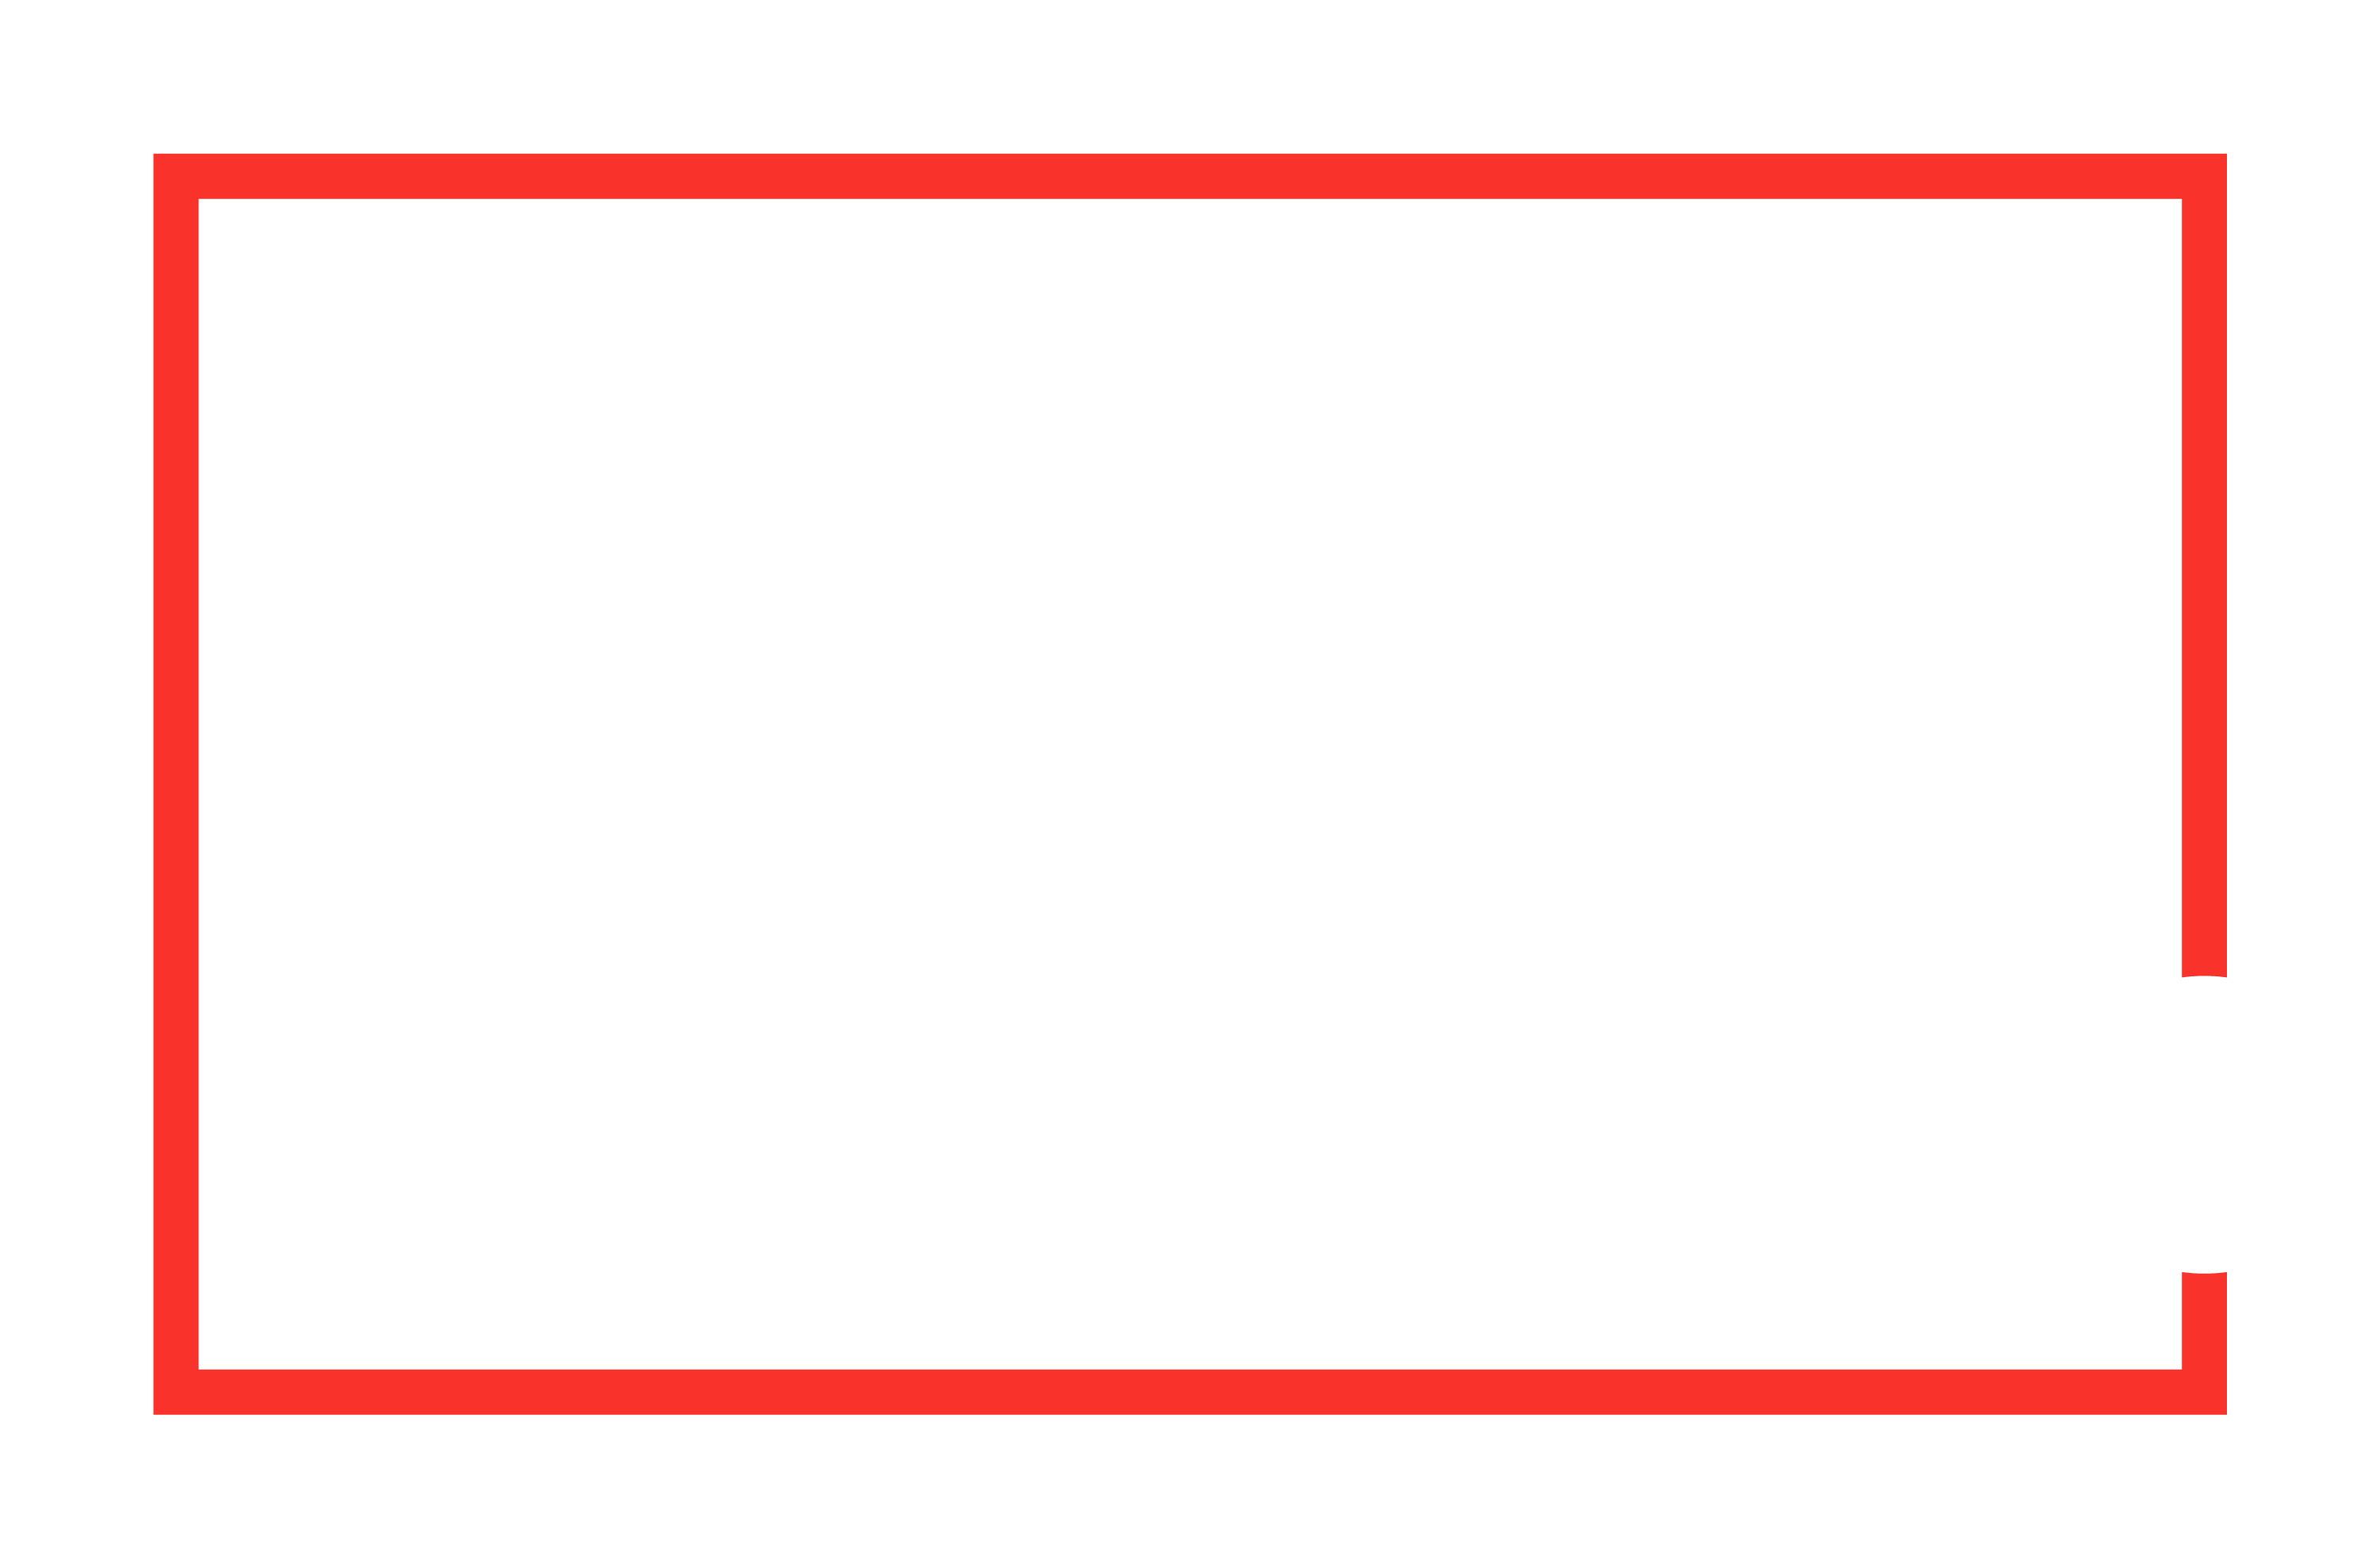 The Eviction Research Network logo